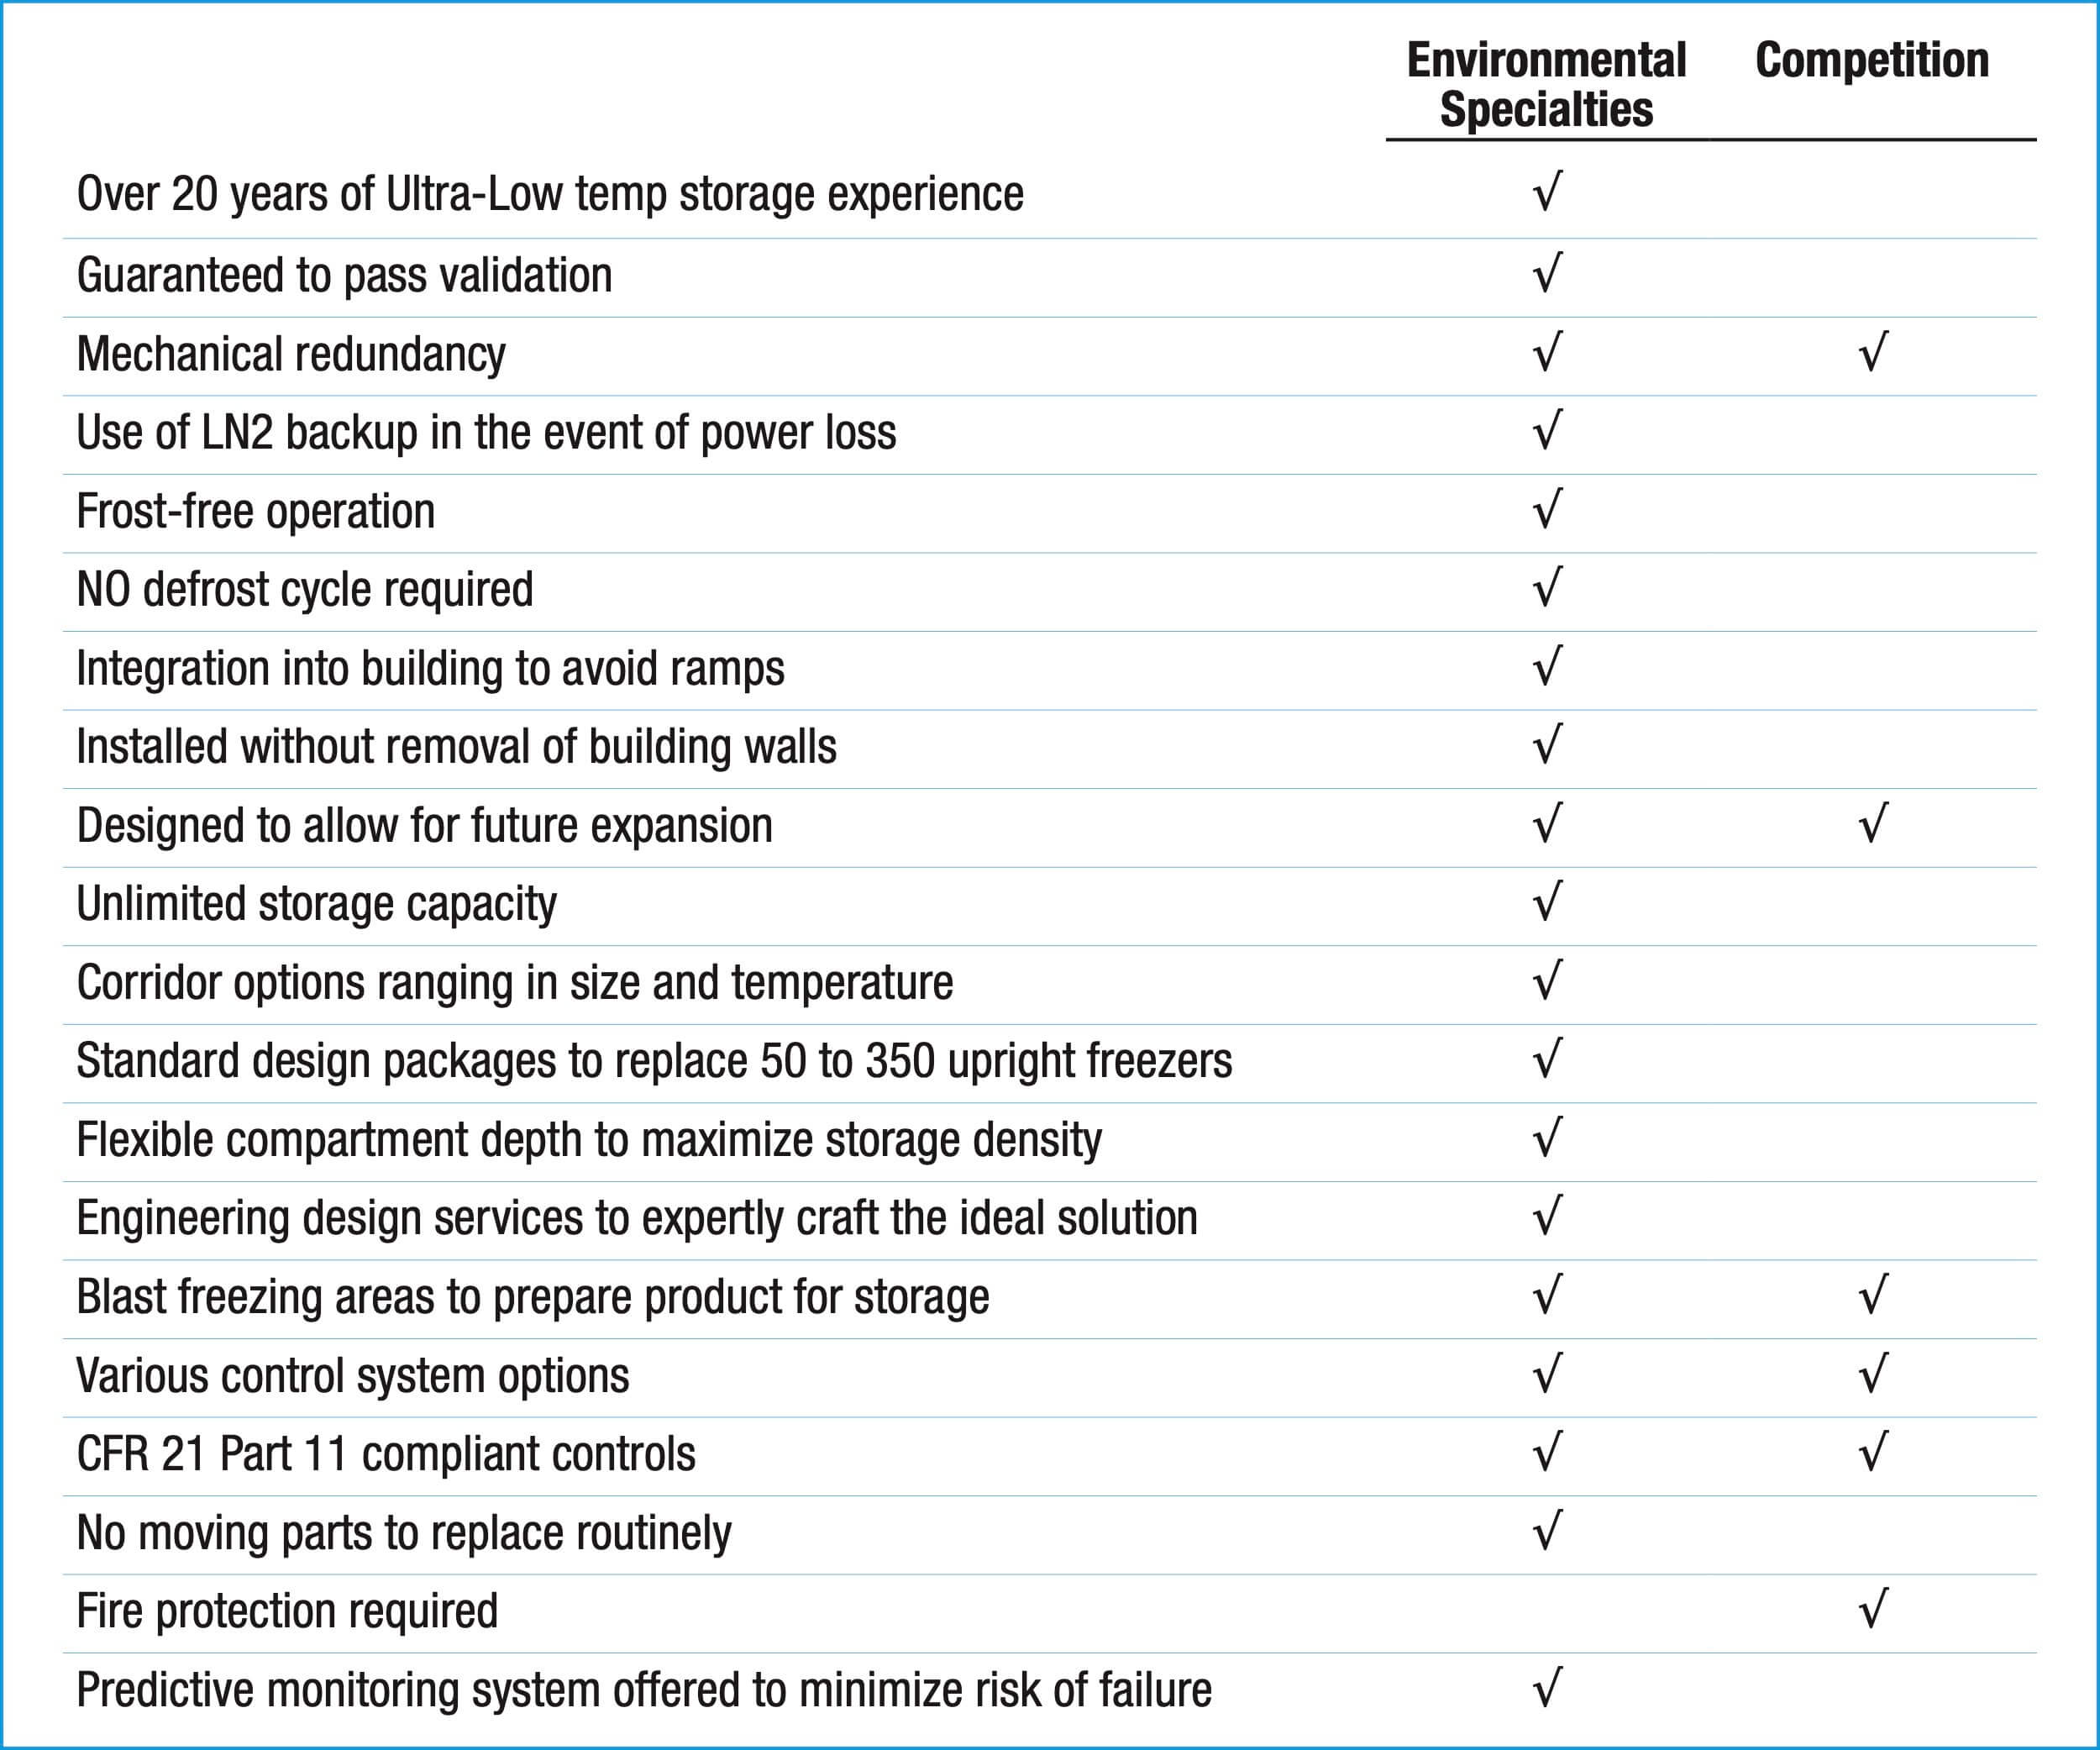 ES vs Competition table_600px_230315 (1).jpg